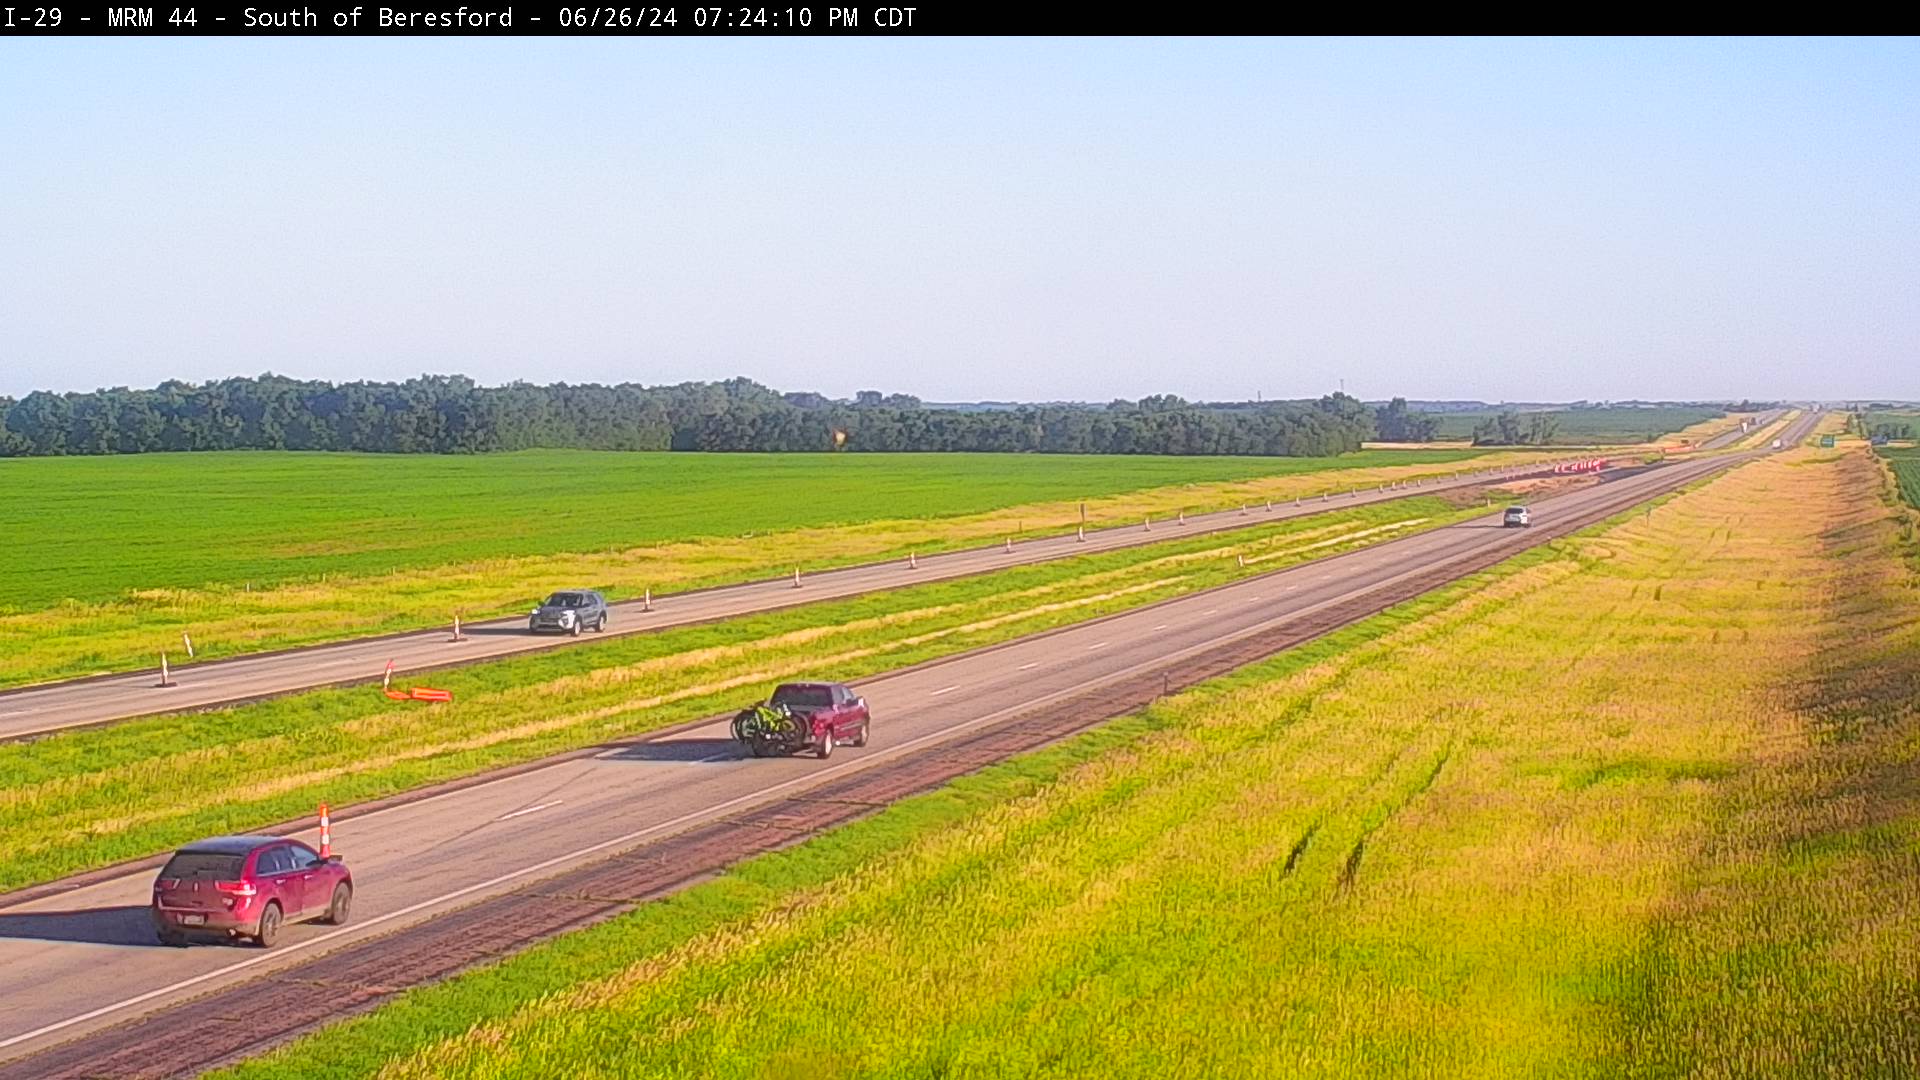 Traffic Cam 2 miles south of town along I-29 @ MP 44 - South Player